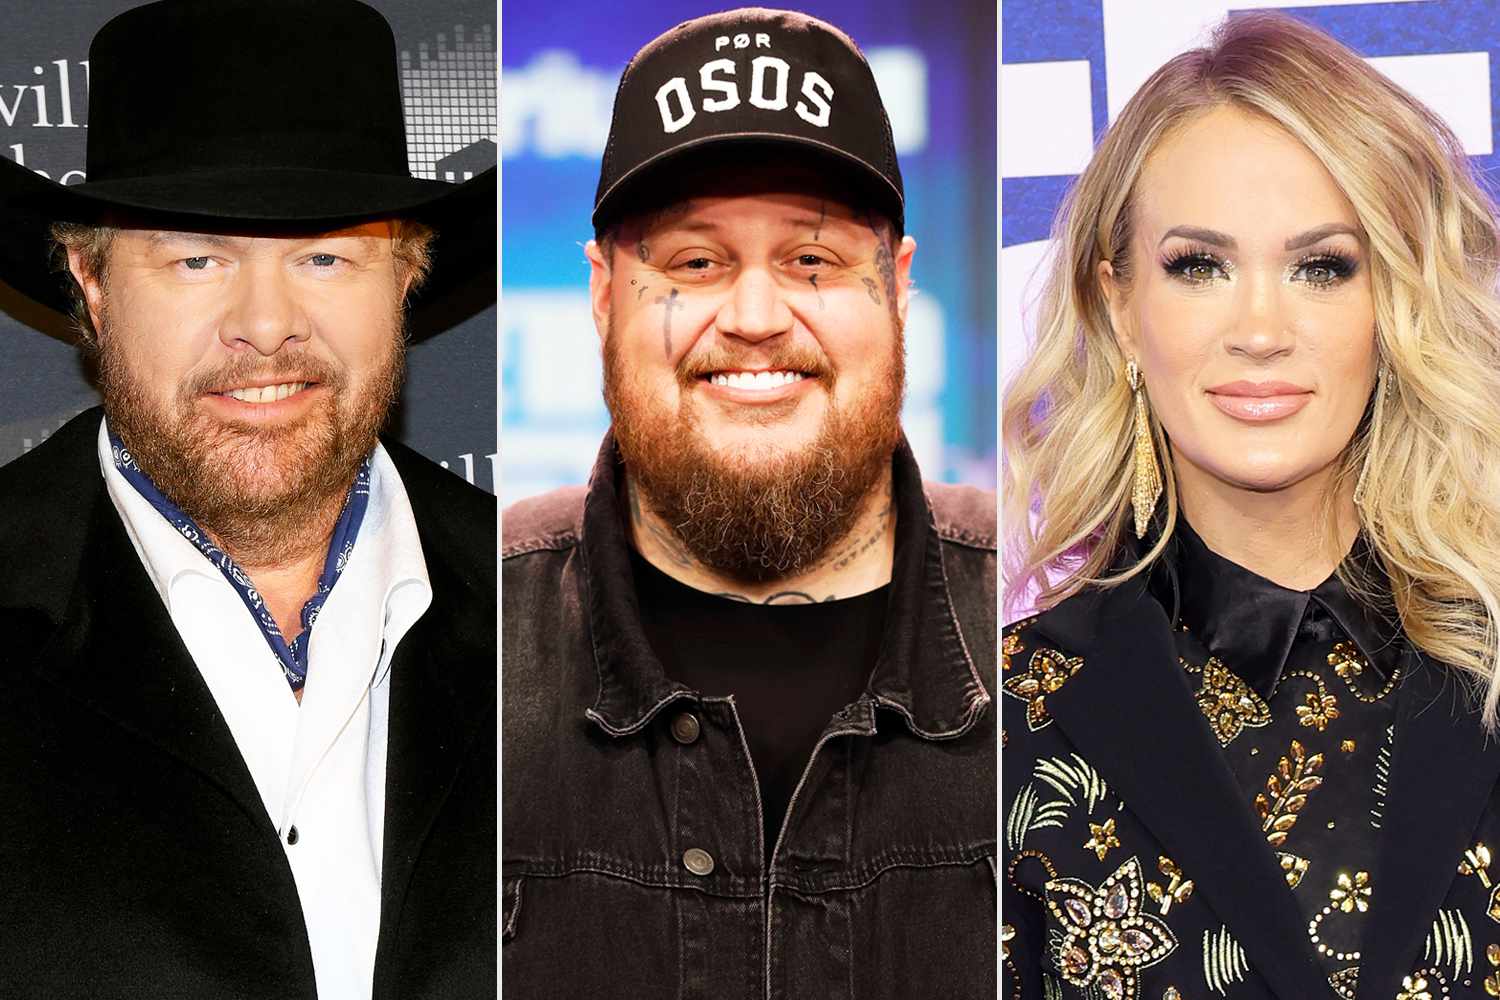 Toby Keith Tribute Concert Taps Jelly Roll, Carrie Underwood and More Country Stars [Video]